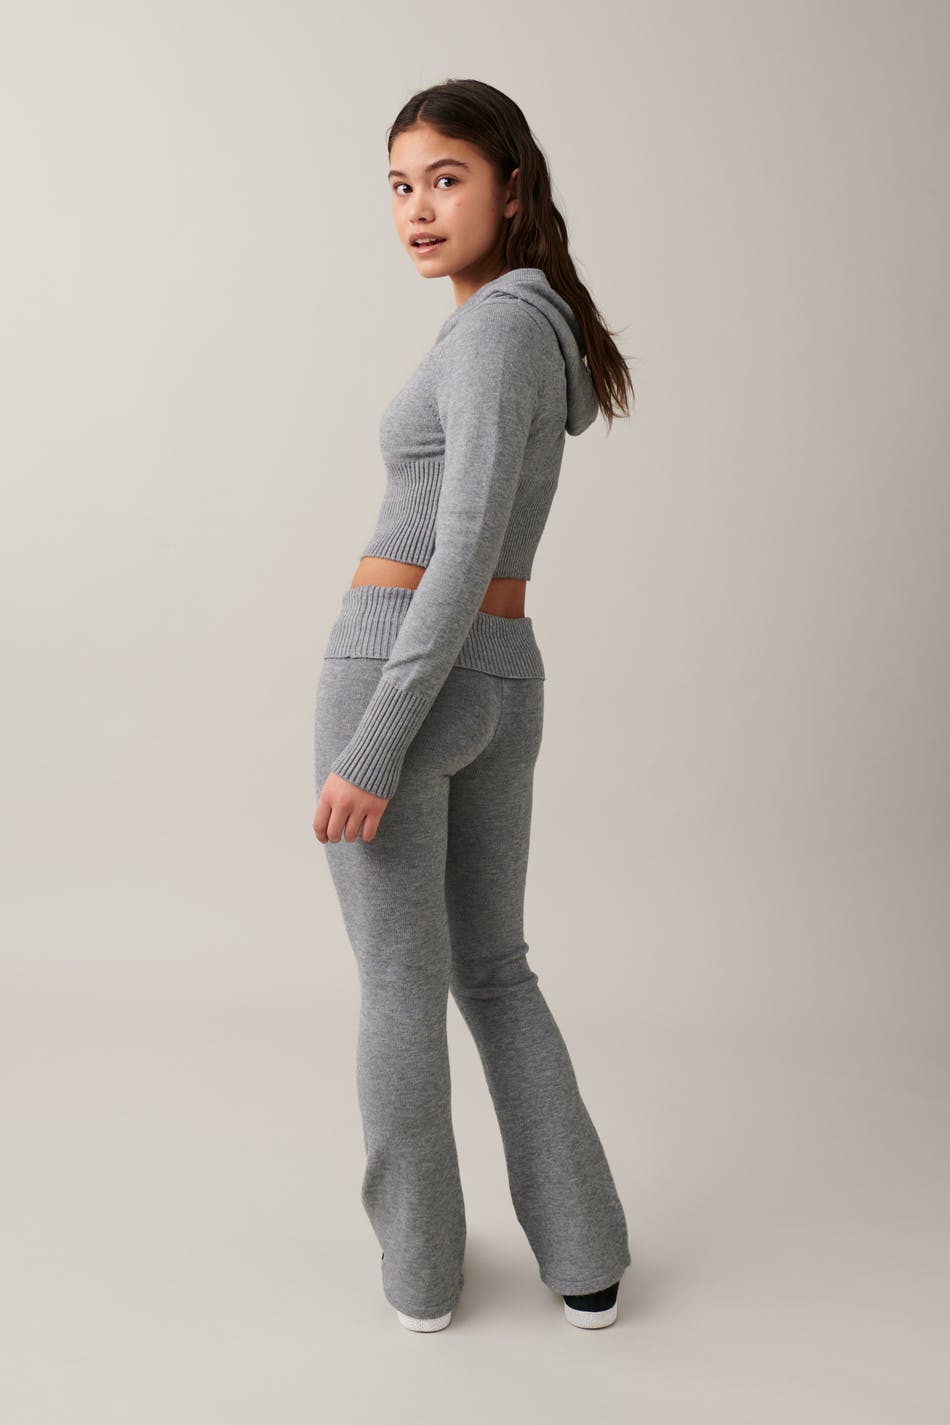 Gina Tricot - Y knitted yoga pants - young-bottoms - Grey - 146/152 - Female